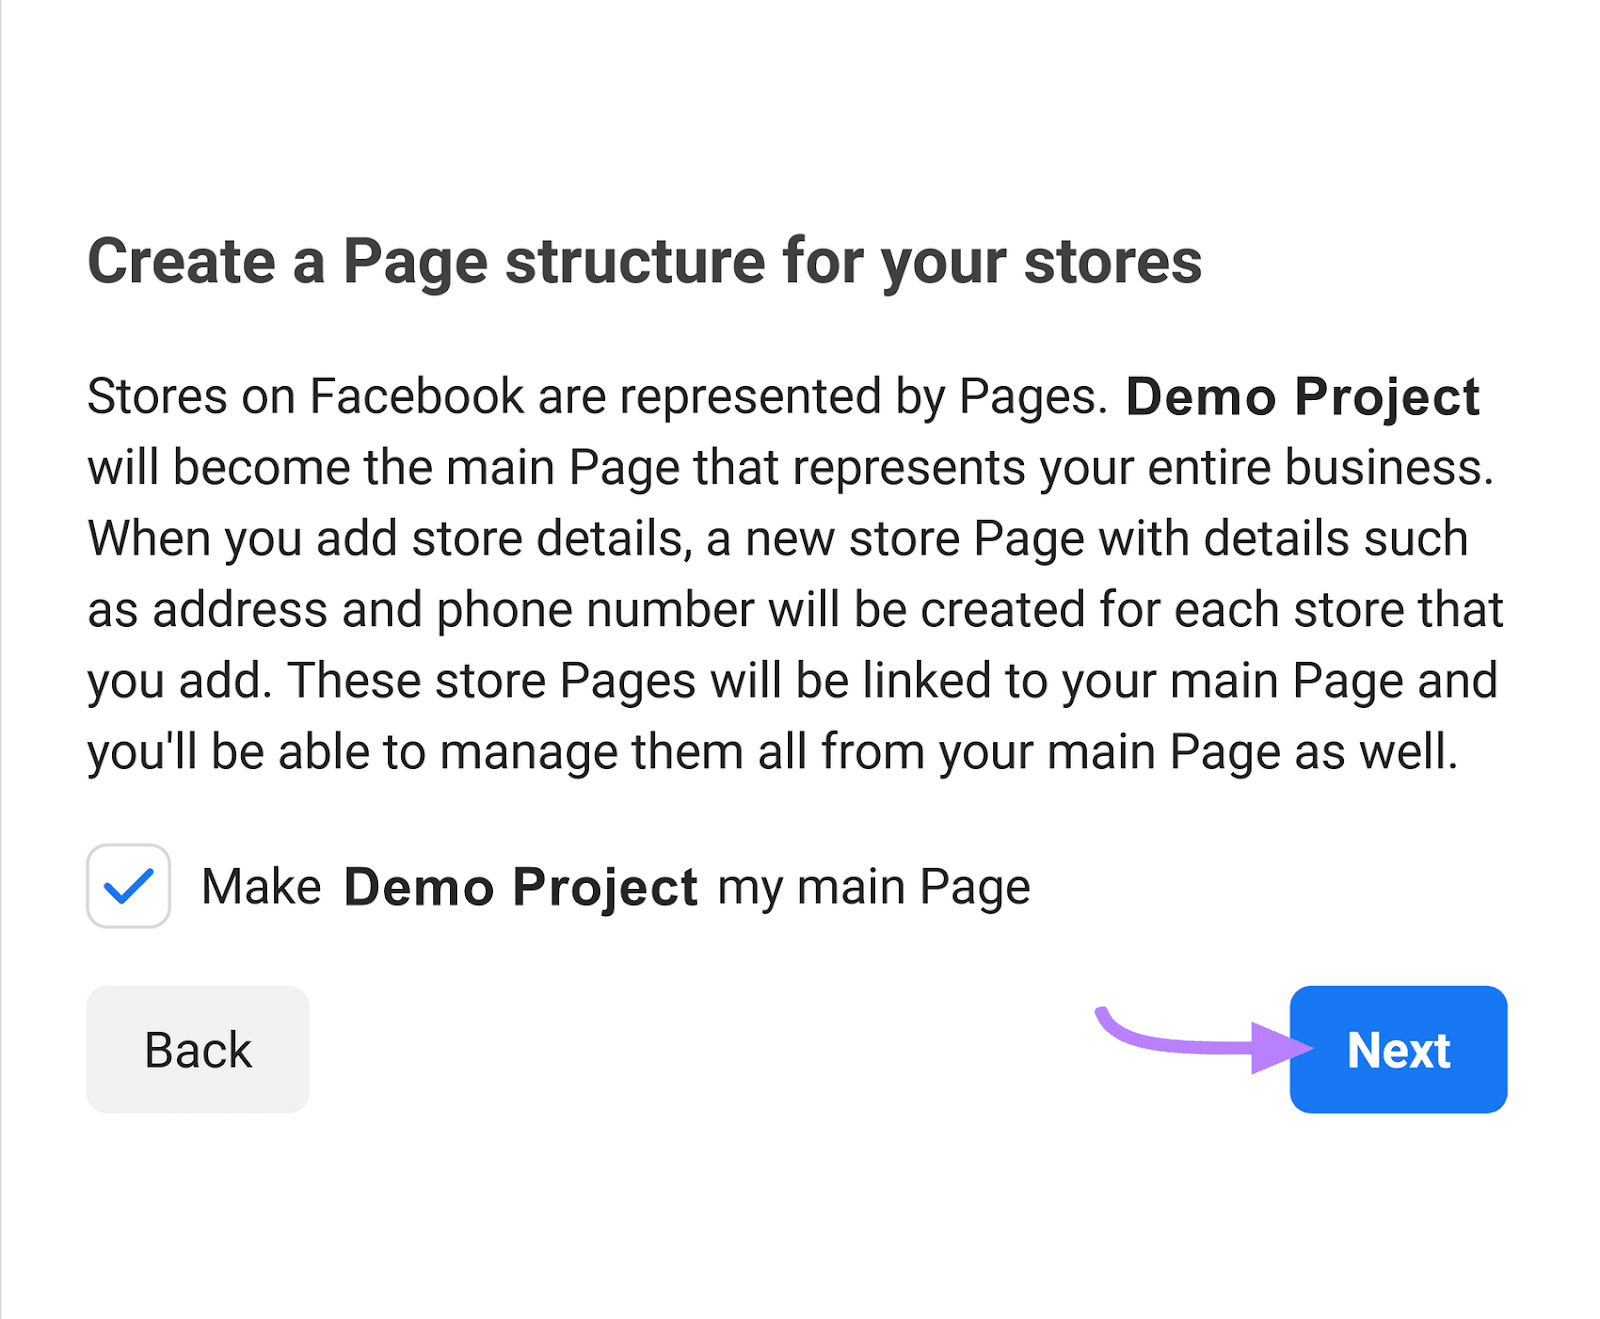 "Make Demo Project my main page" box clicked